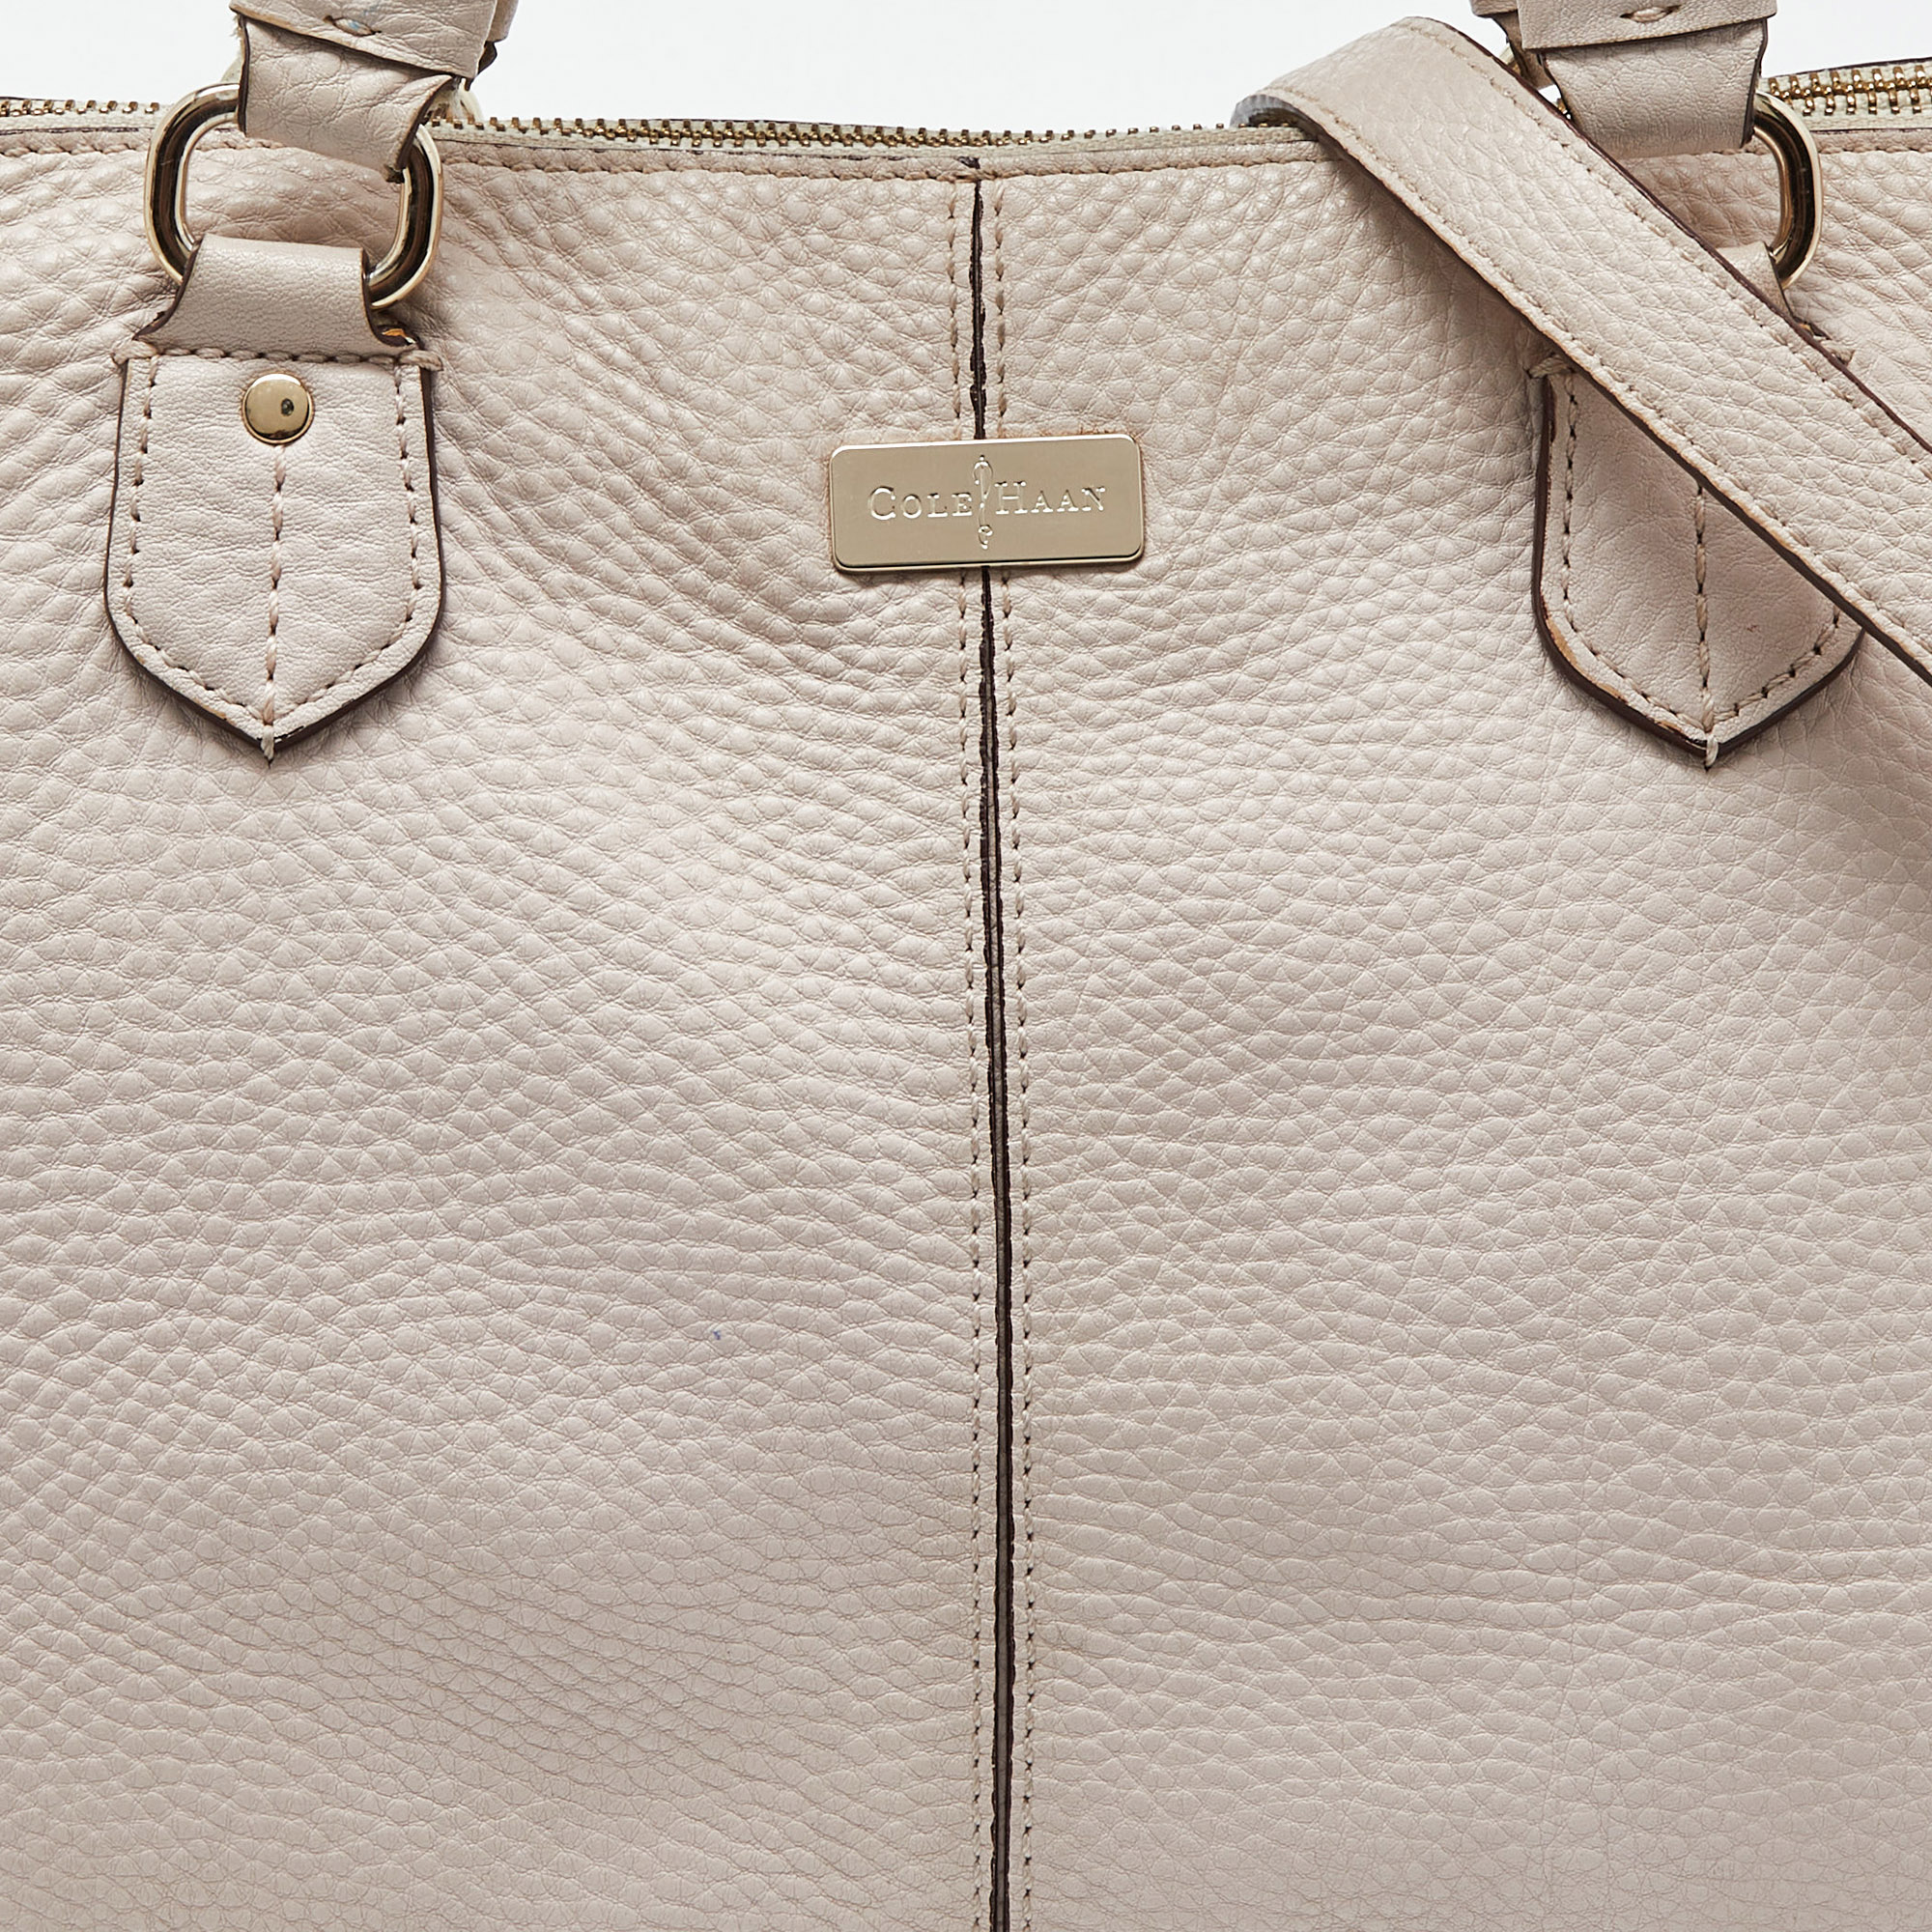 Cole Haan Pink Pebbled Leather Tote